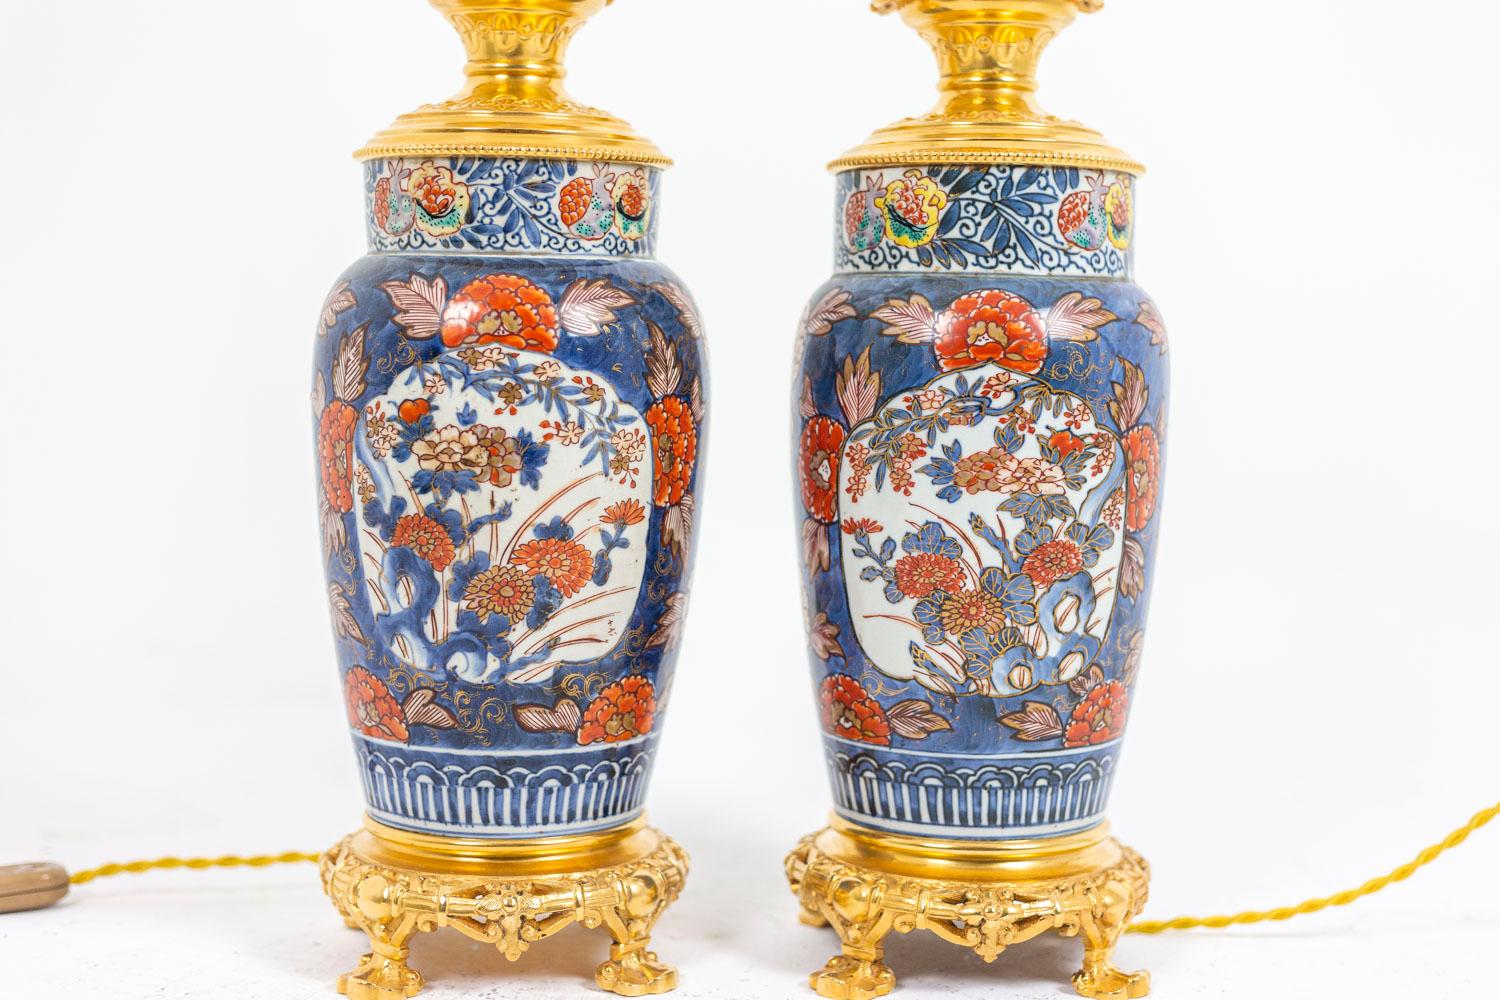 Pair of Lamps in Imari Porcelain and Gilt Bronze, circa 1880 For Sale 1